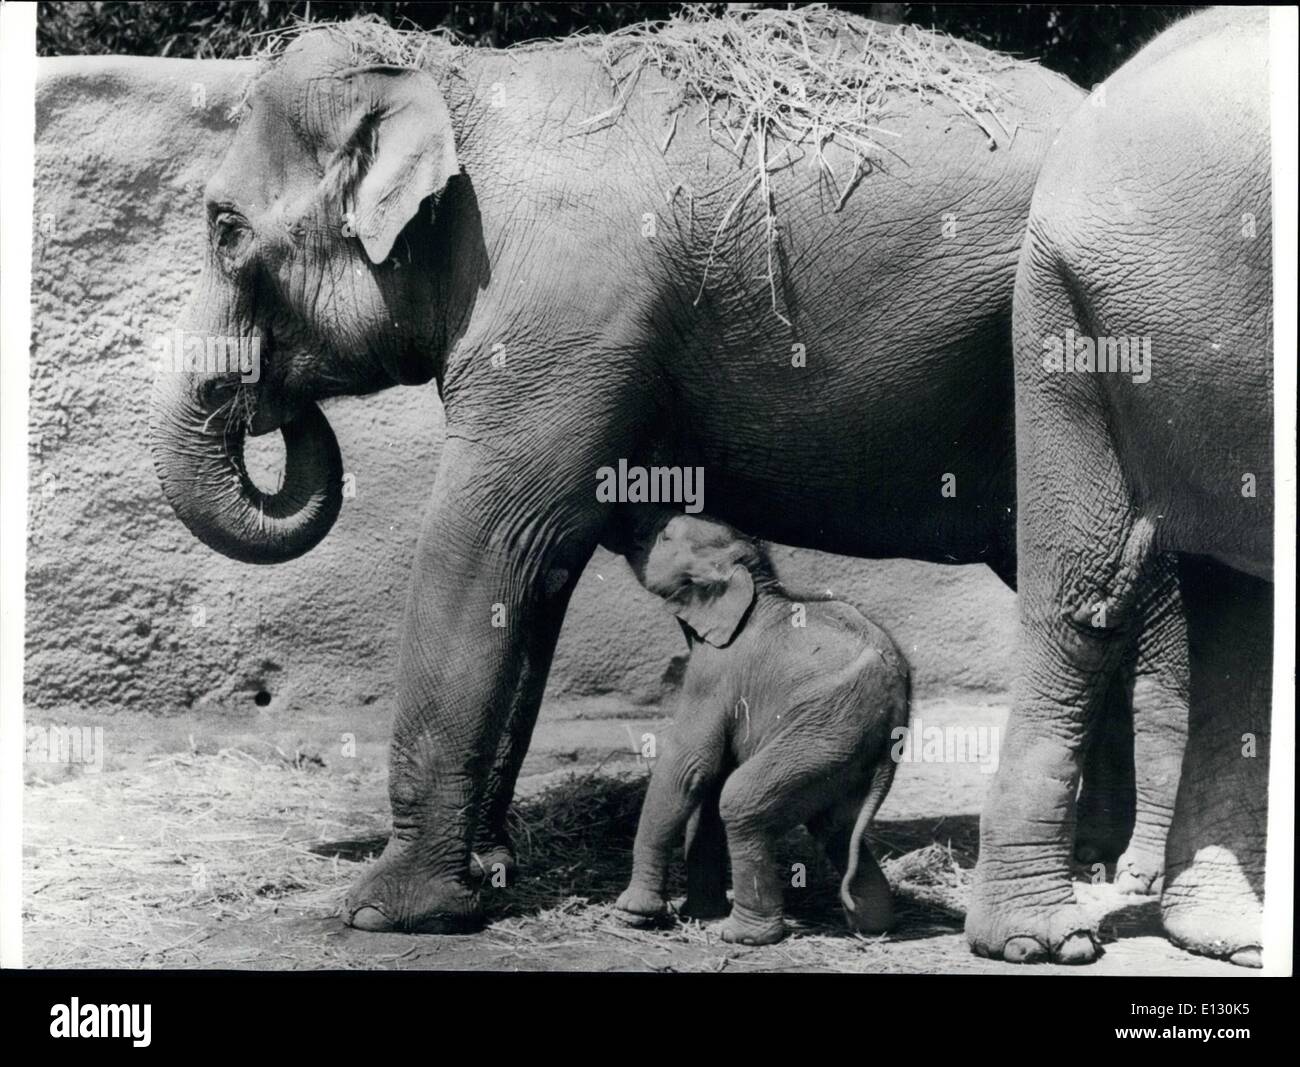 Feb. 26, 2012 - The day an elephant will never forget: ''it took  months of waiting, but the result was magnificent and made every minute of anticipation worthwhile'', said an official at the Los Angeles Zoo in California. And if this picture is anything to judge by the whole world can join in the happy event. The baby Full Asian elephant weighed in at 150 lbs, which was quite an accomplishment for its 6,500 lb. mother, ''Metu'' Stock Photo